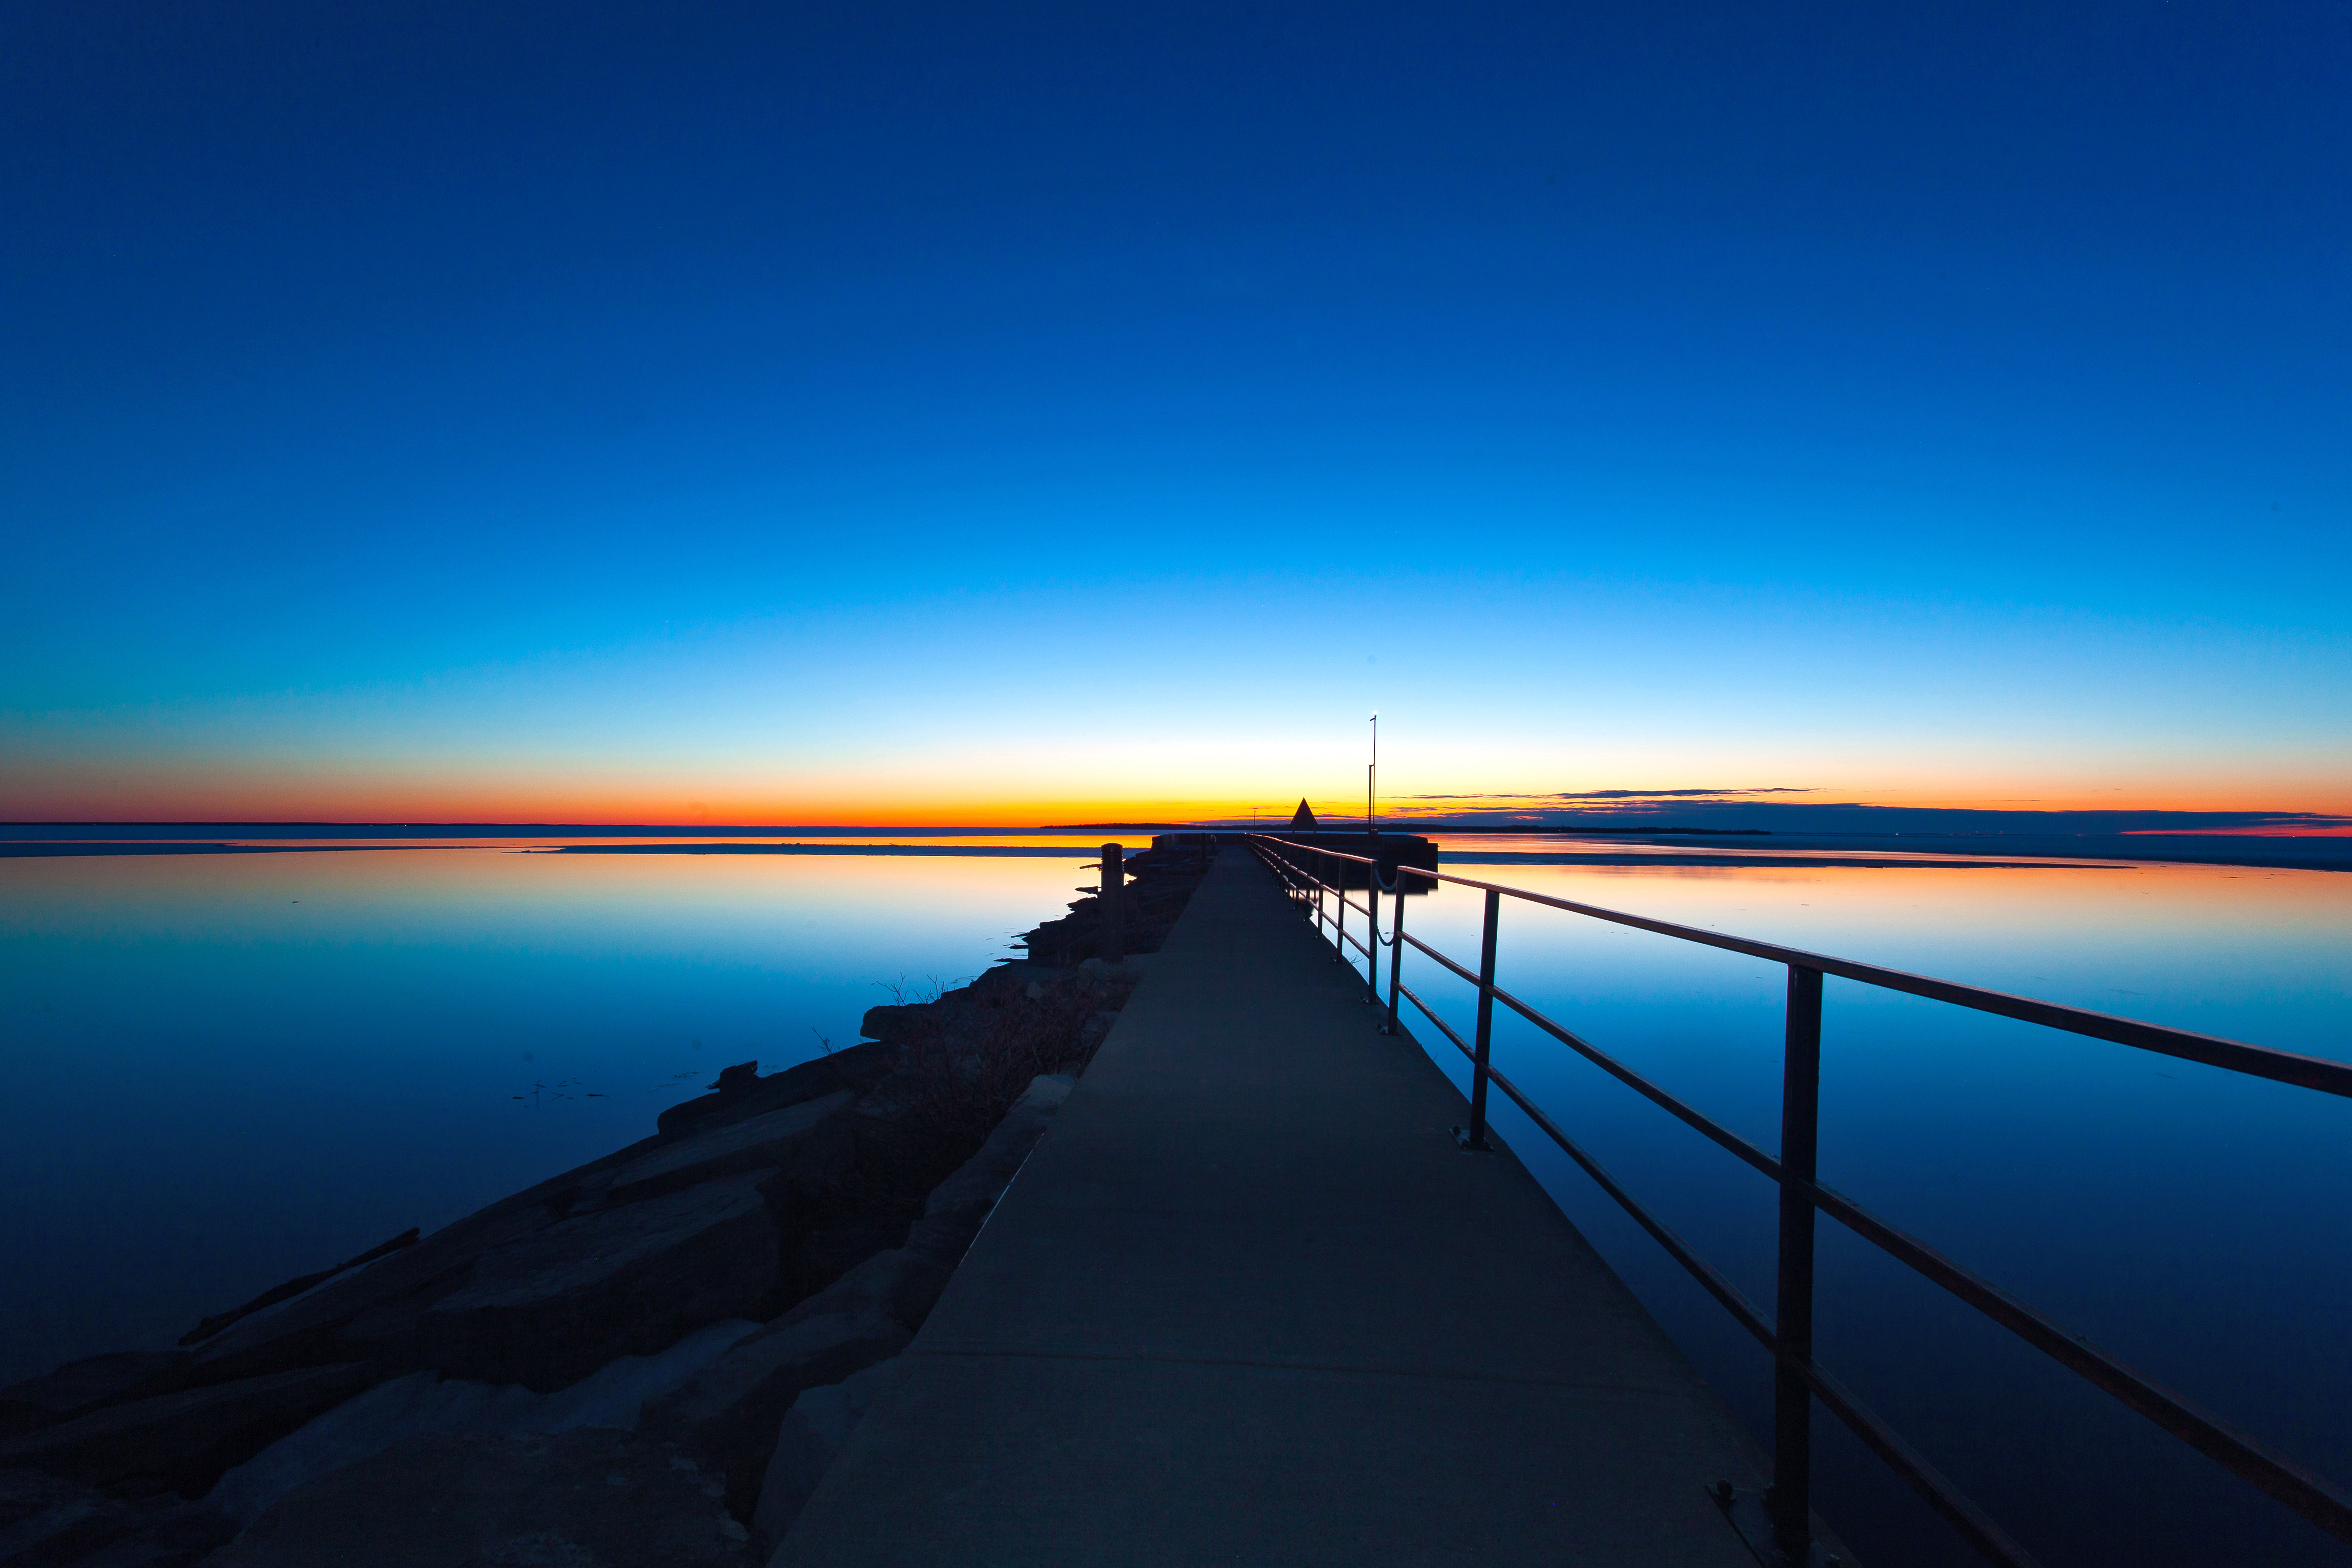 Photo taken on the pier during sunset at the Beaverton Harbour. The water is flat on Lake Simcoe and the sky features vibrant shades of blue, red and orange.